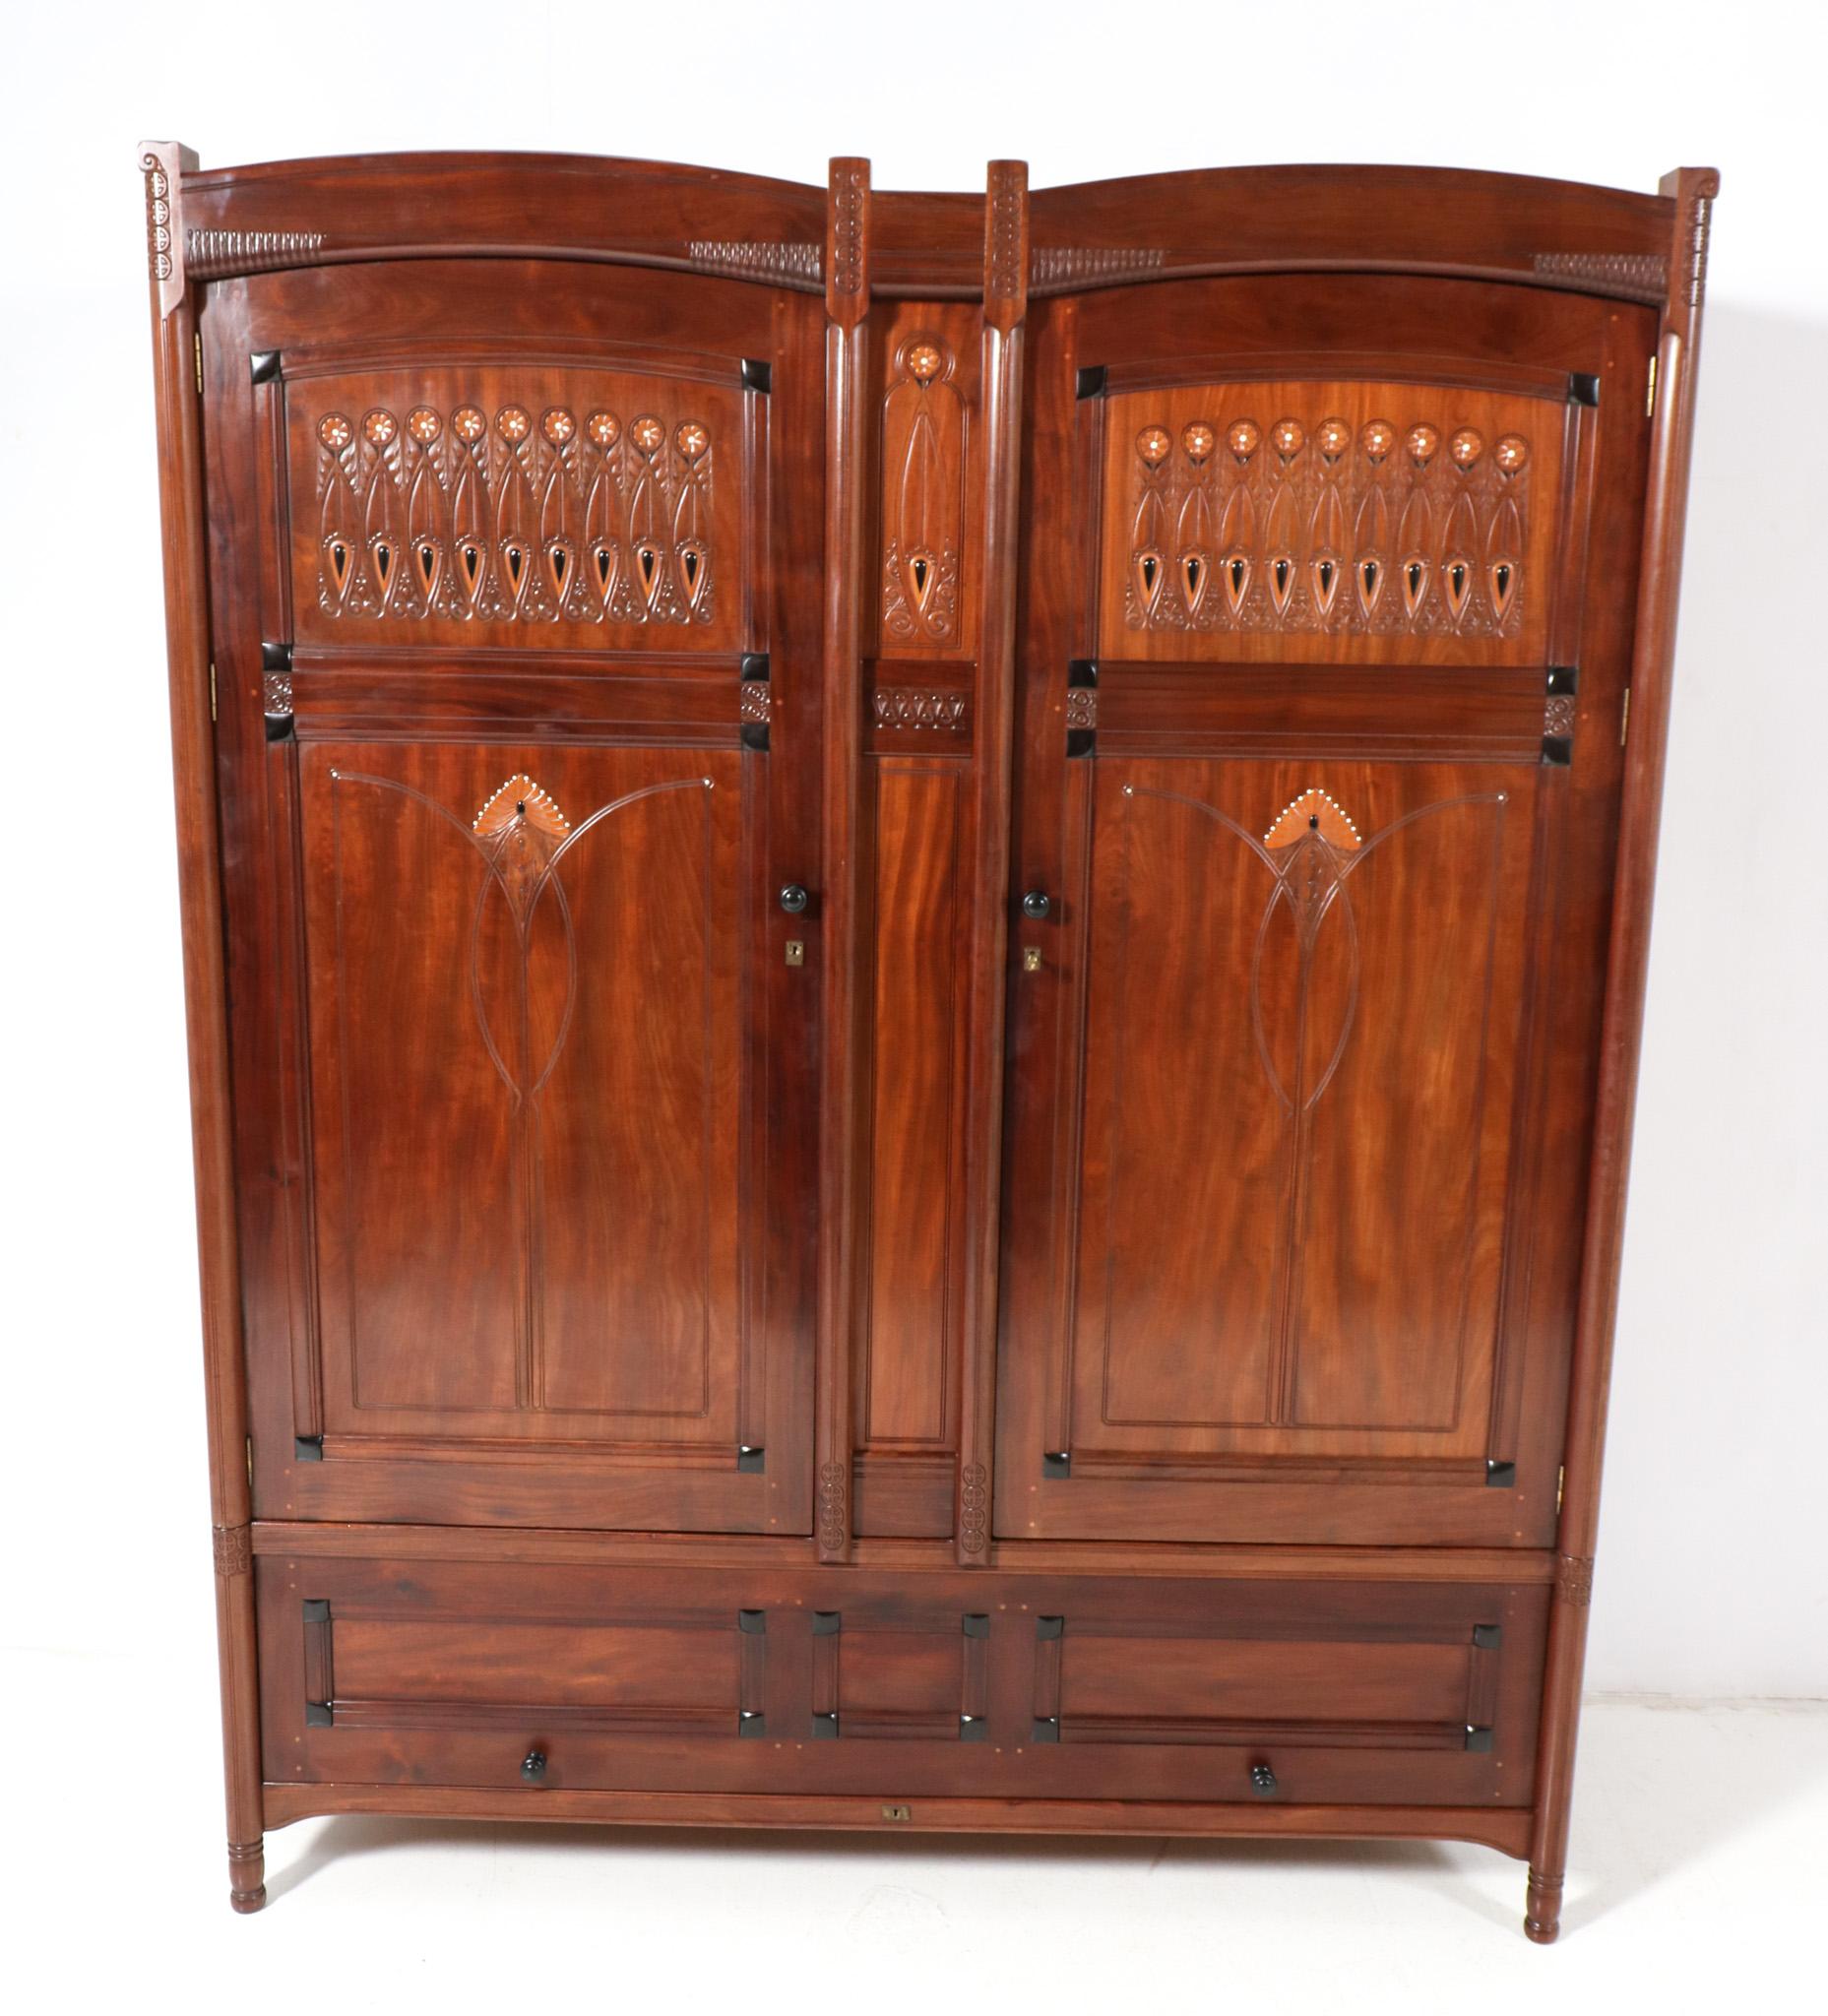 Magnificent and ultra rare Arts & Crafts armoire or wardrobe.
Design by Jac. van den Bosch for 't Binnenhuis Amsterdam.
Striking Dutch design from 1910.
Solid American walnut with ebony, palmwood and inlay.
Behind the left door you will find four